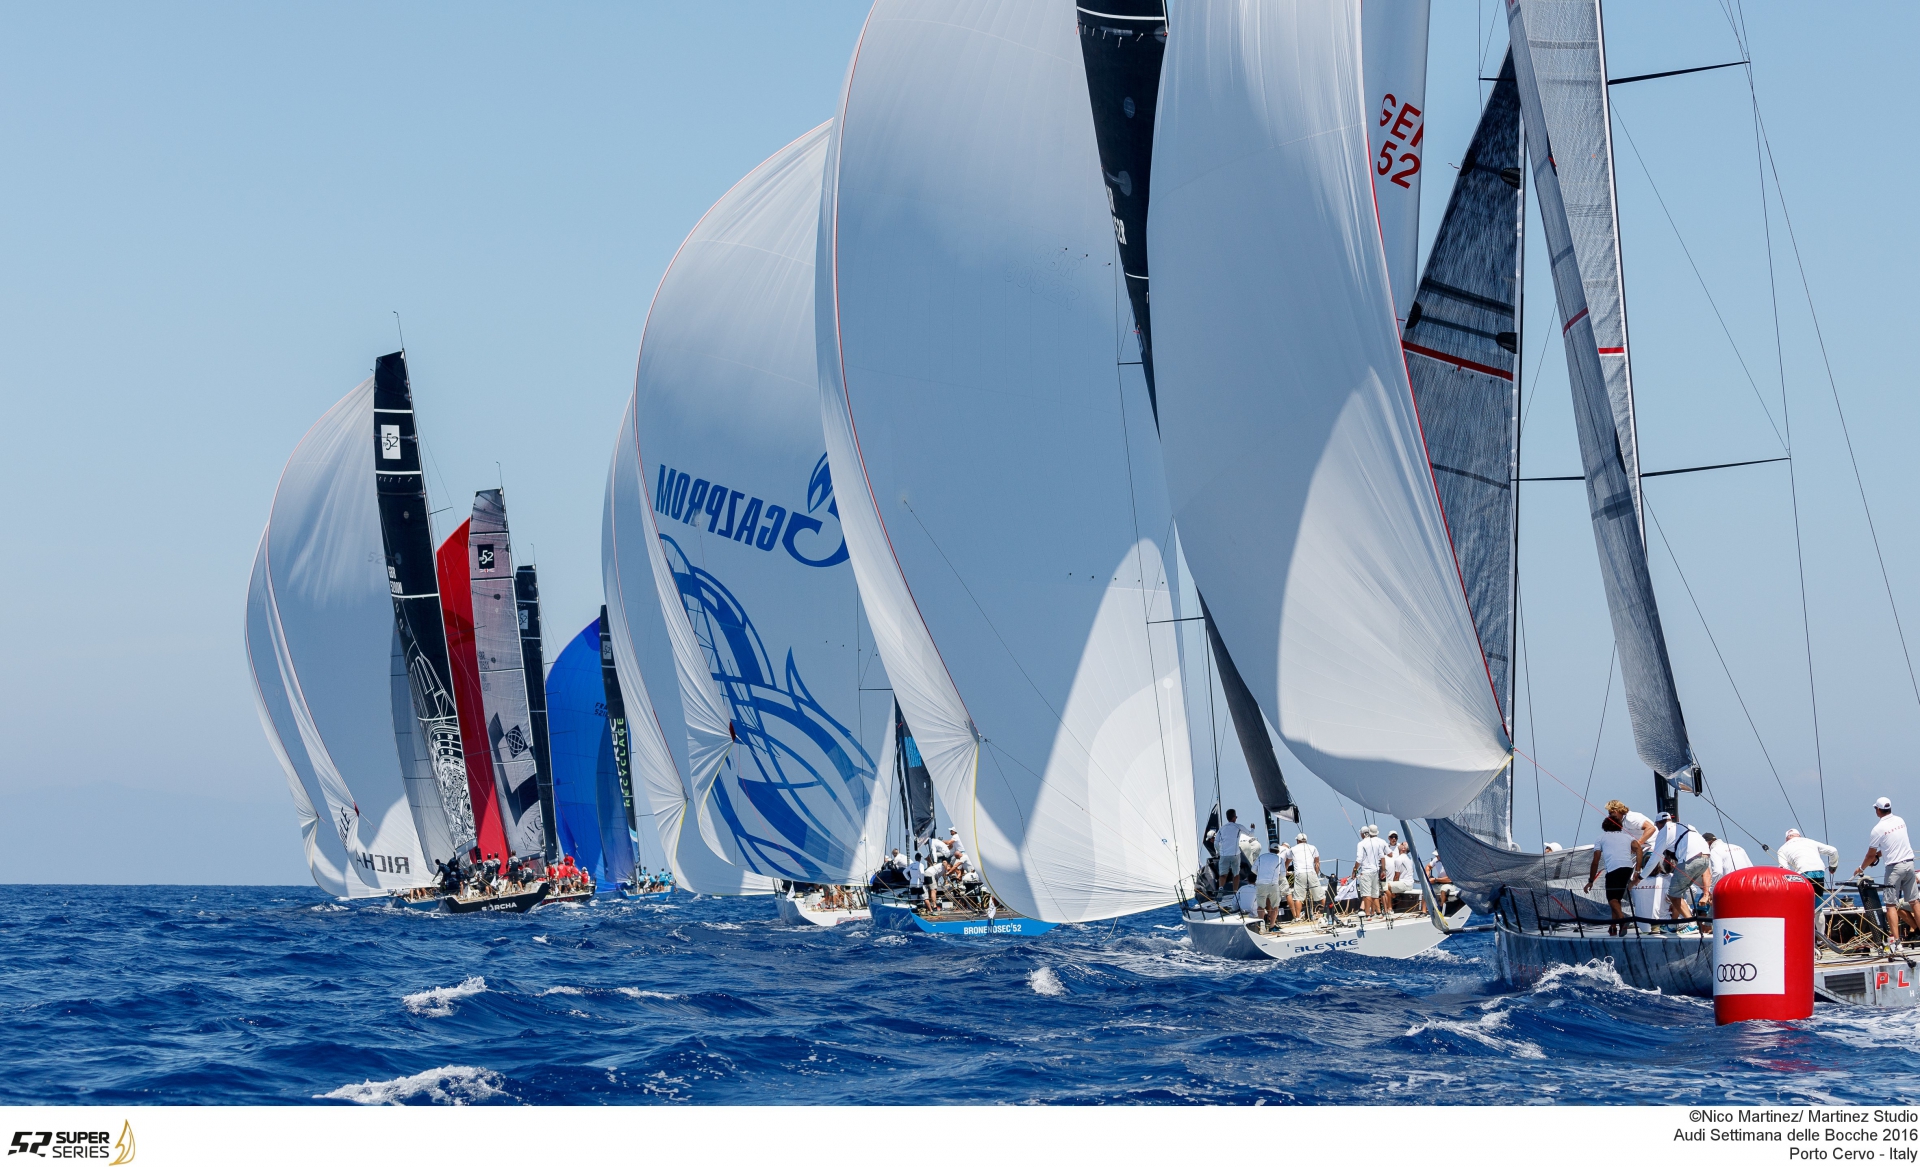 Audi Sailing Week, 52 Super Series - Images race Day 2 online - NEWS - Yacht Club Costa Smeralda